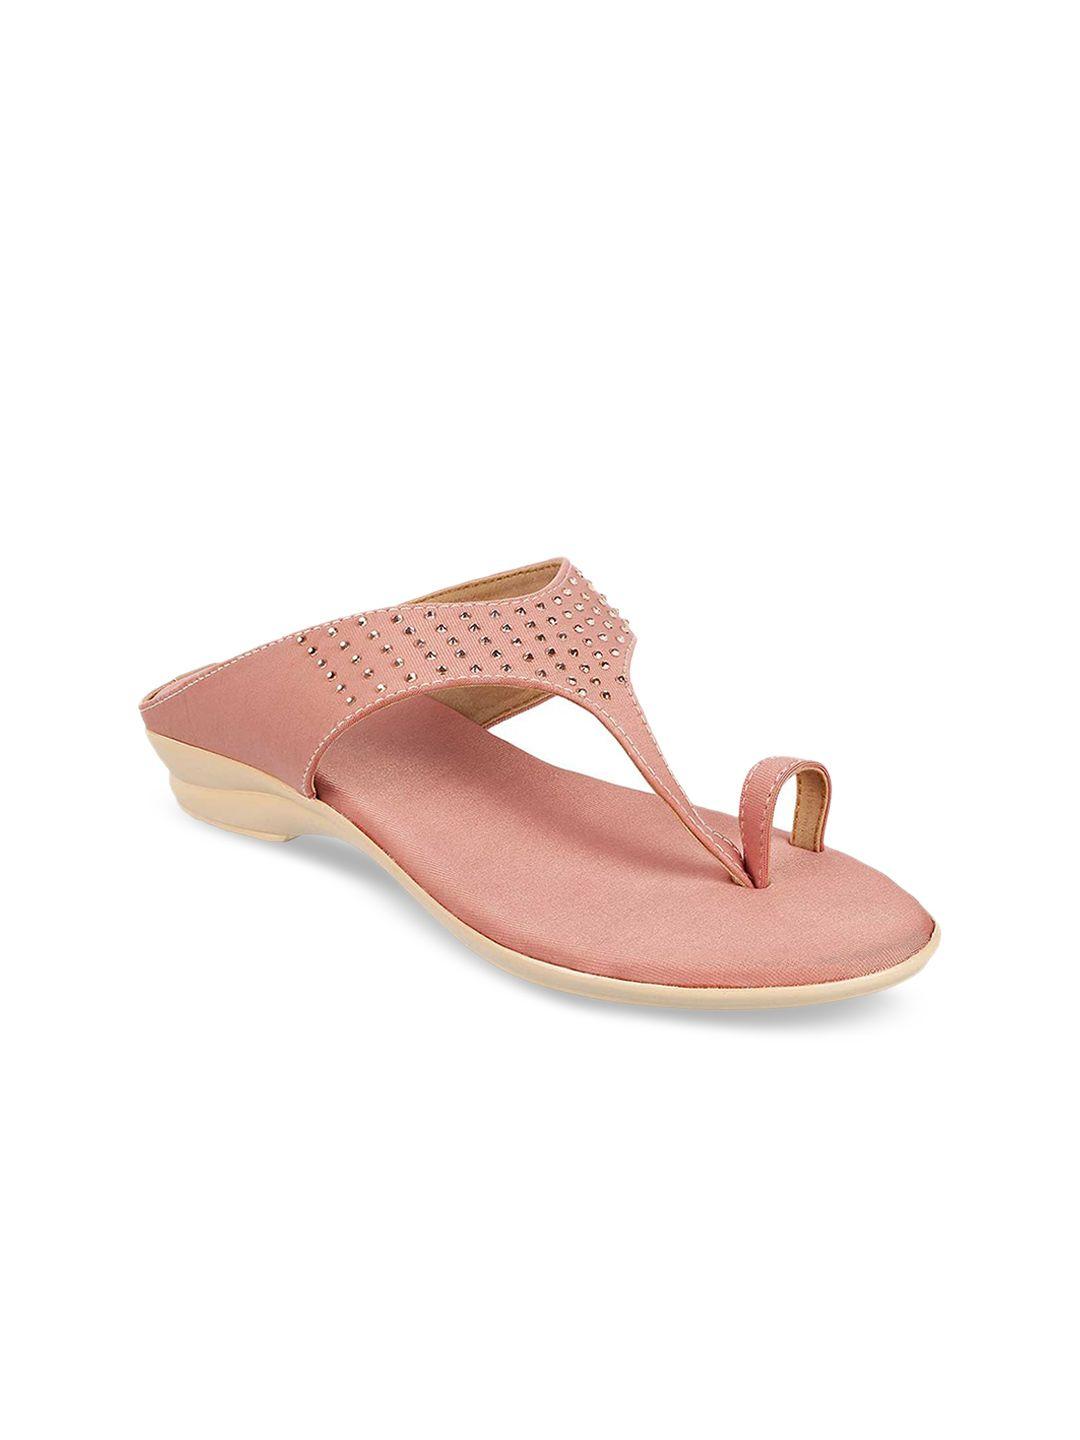 walkway by metro women peach-coloured textured one toe flats with laser cuts